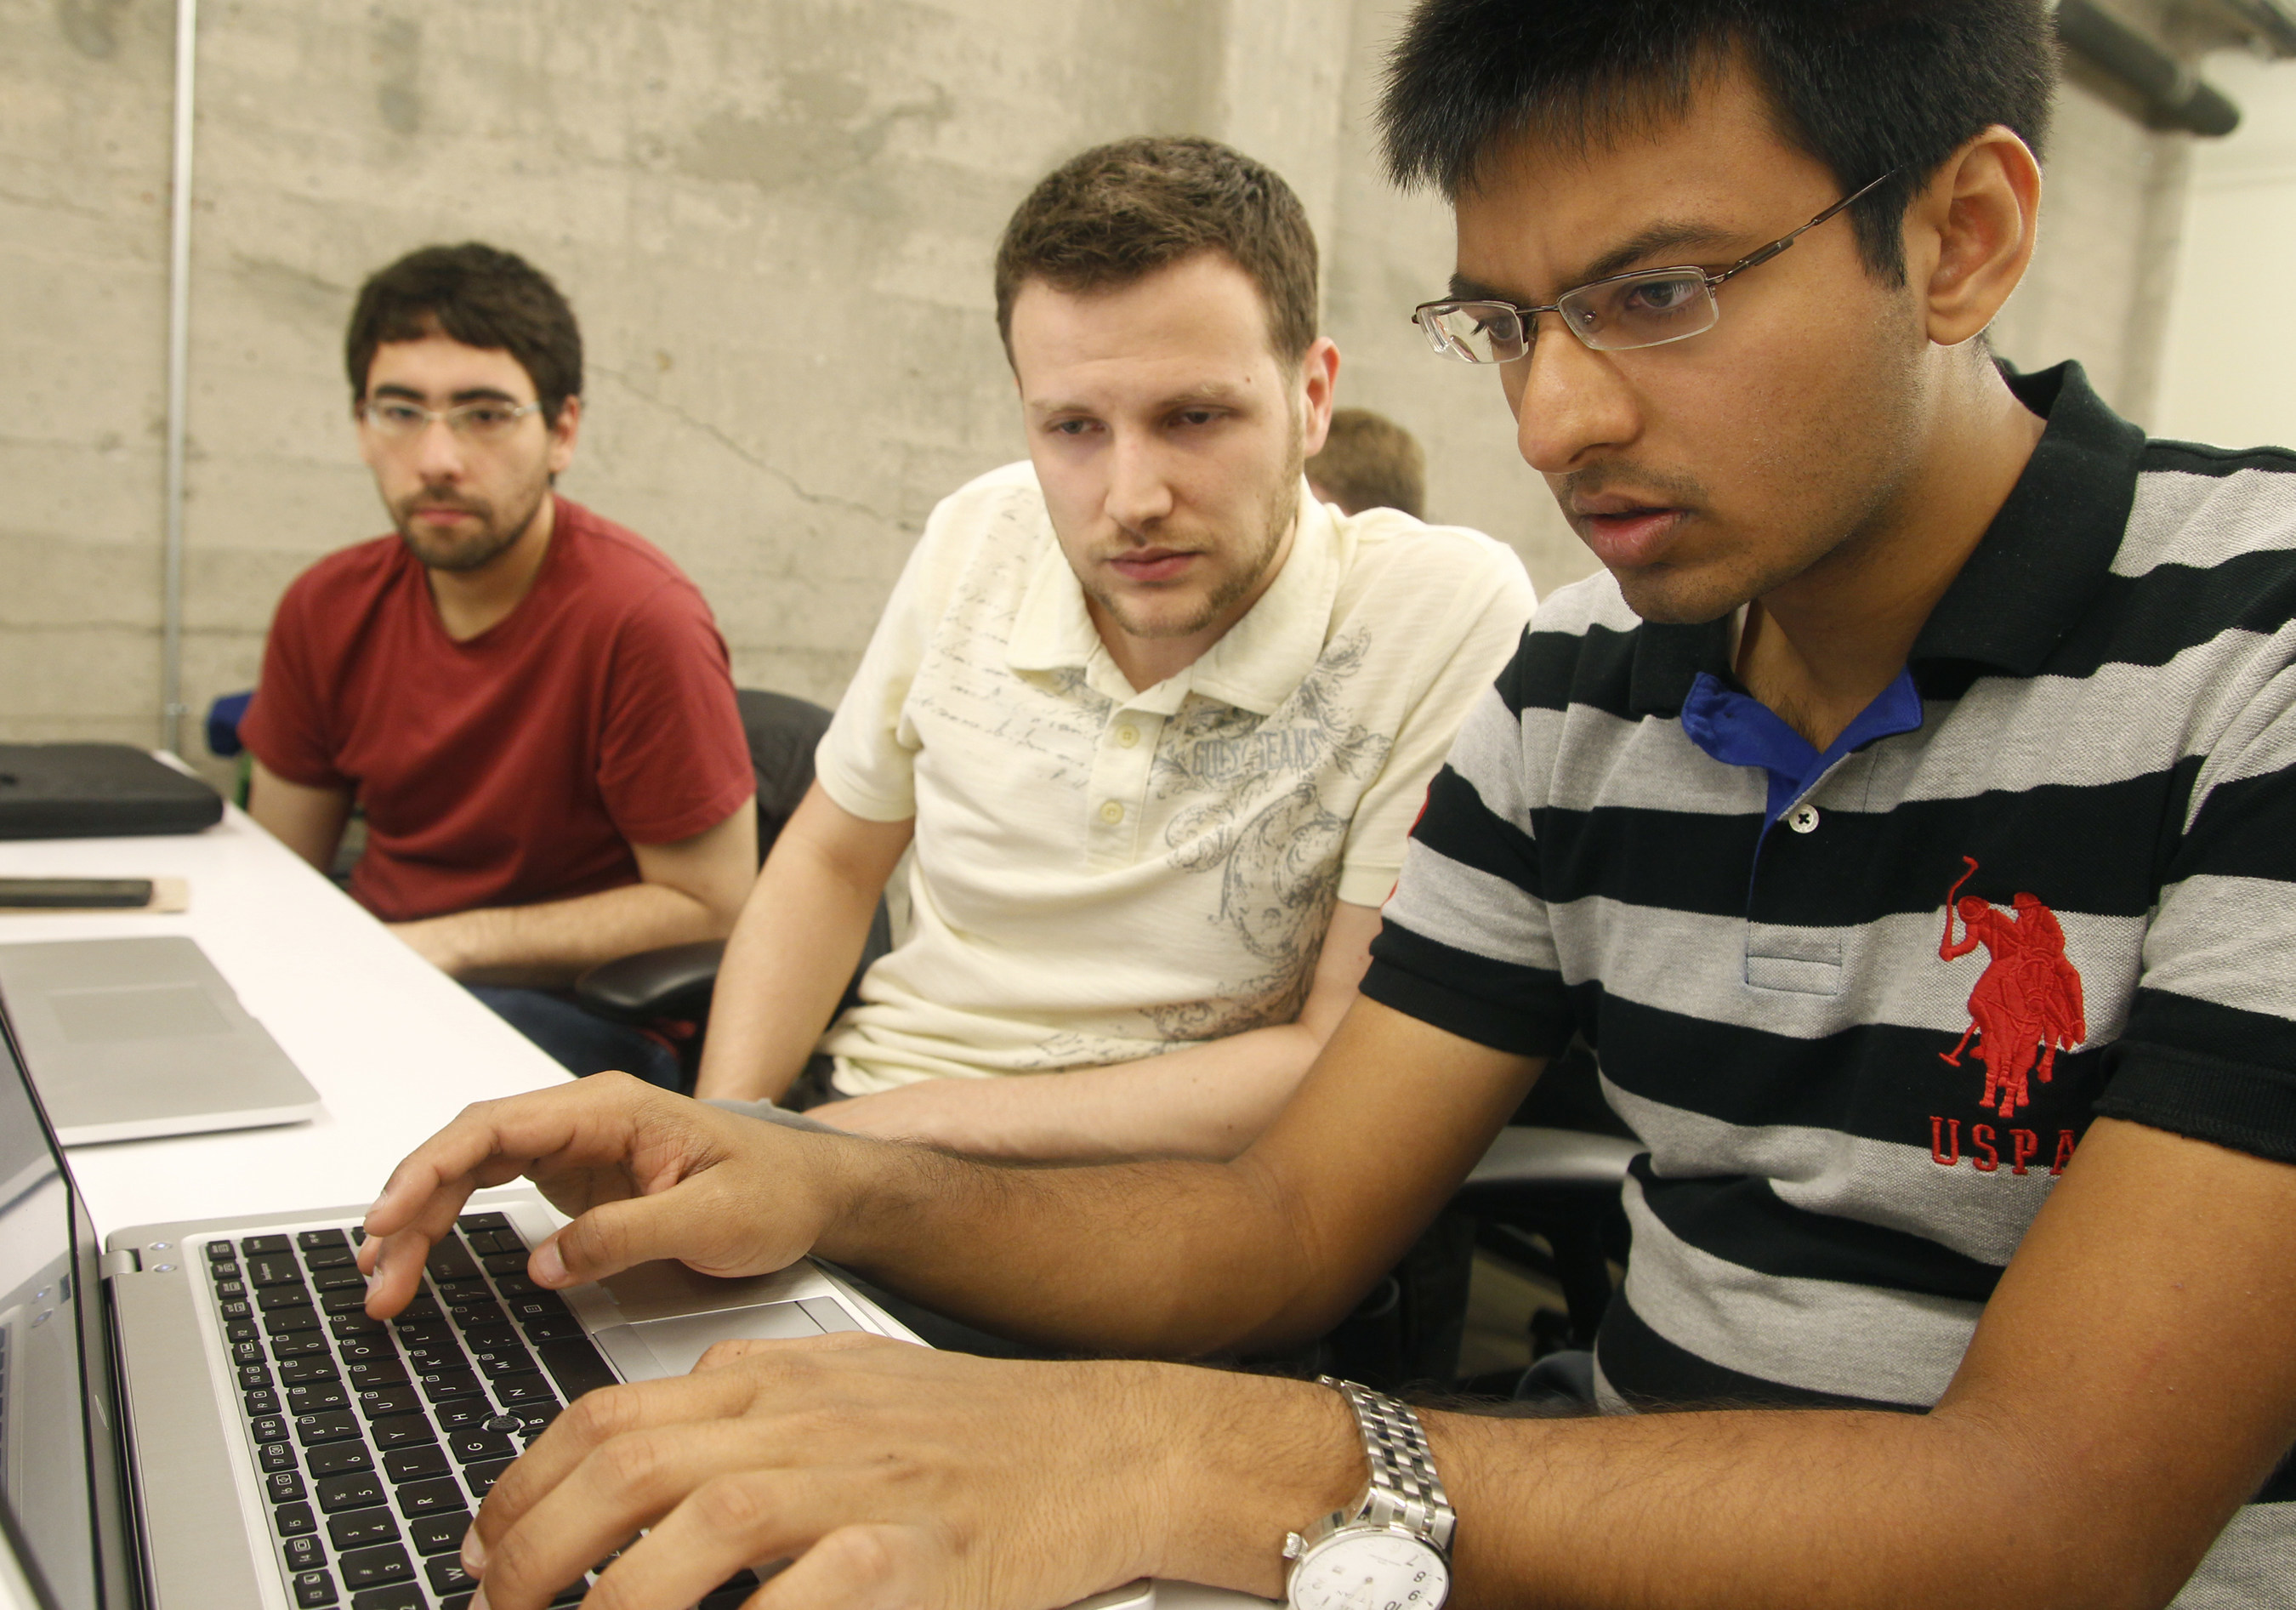 Shiva Gopalan, an engineering student at Texas A&M University, confers with IBM developers Henrique Copelli Zambon and Luiz Aoqui, during an IBM hosted Spark Hackathon at Galvanize, a tech hub in San Francisco.